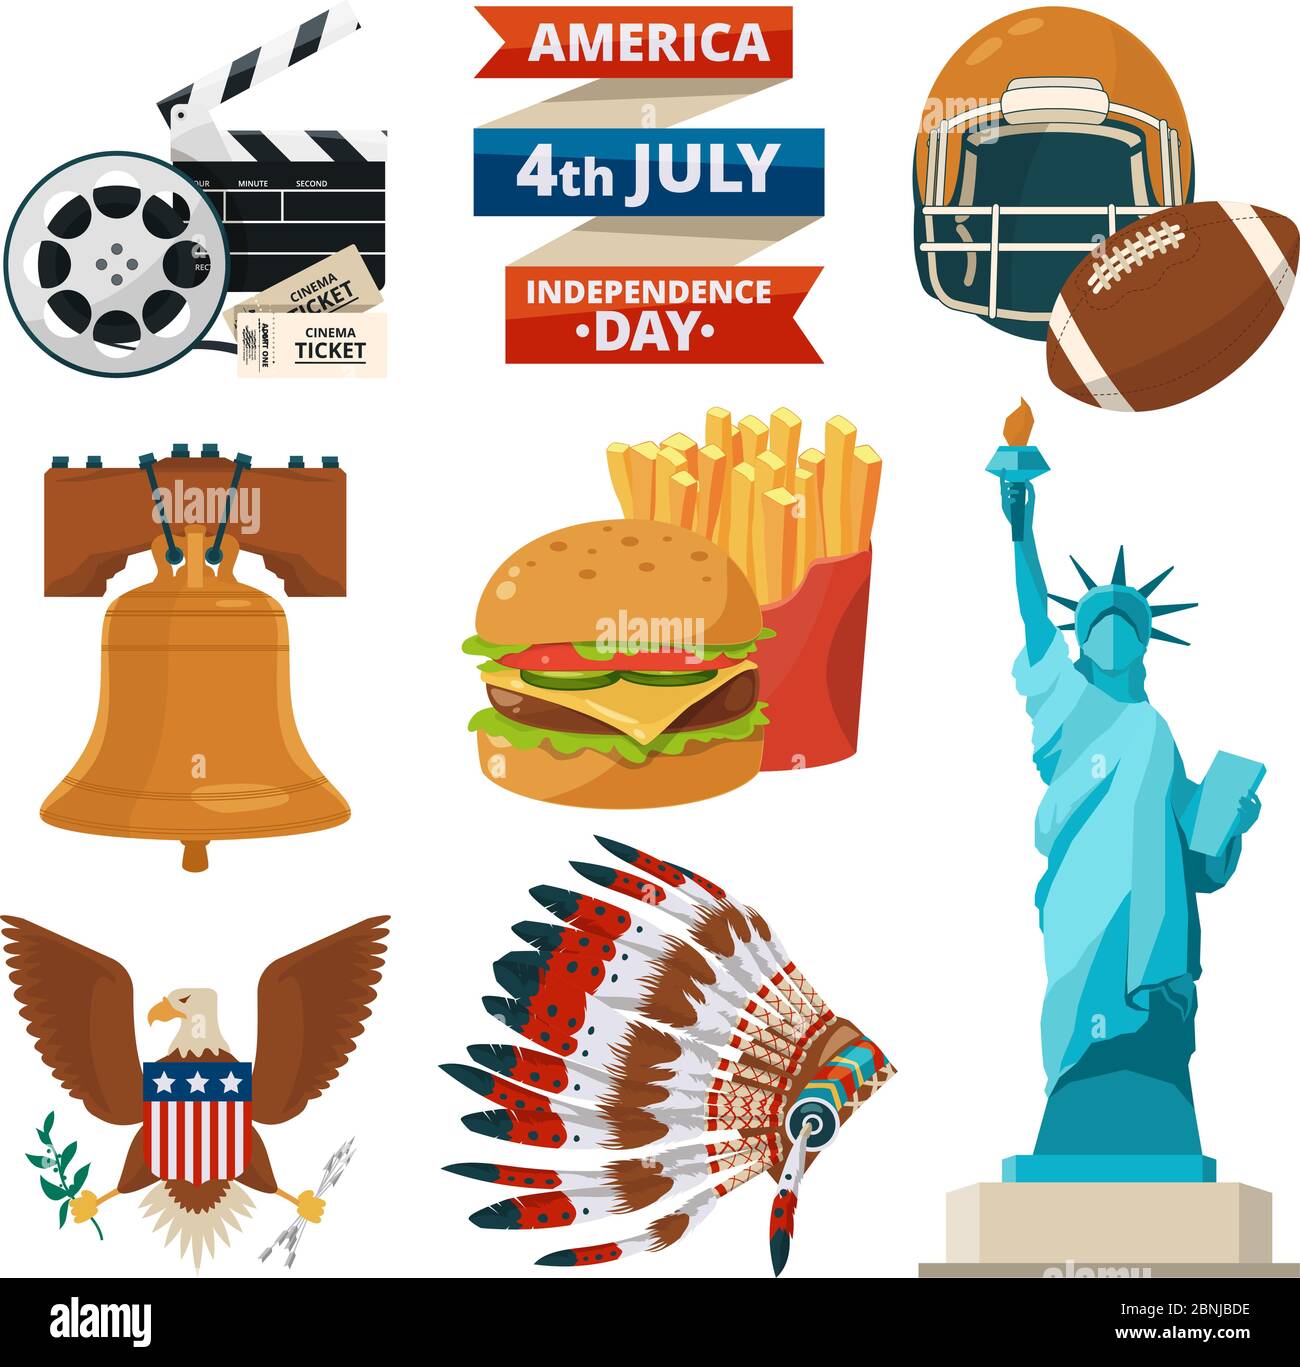 Culture objects of americans usa. Vector illustrations in cartoon style Stock Vector